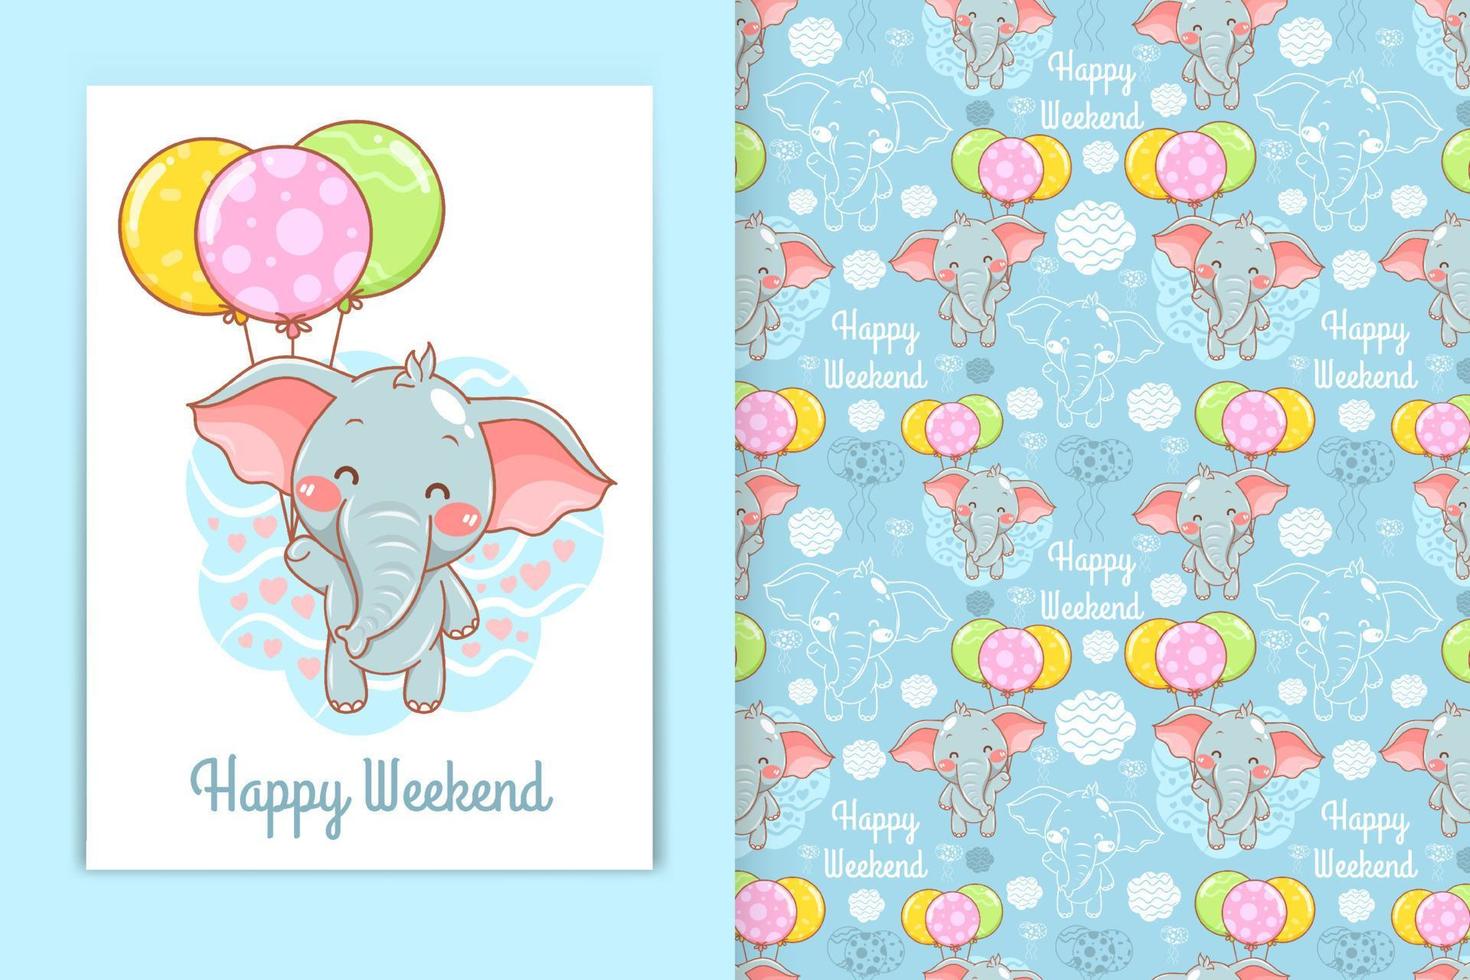 cute baby elephant with balloon cartoon illustration and seamless pattern set vector